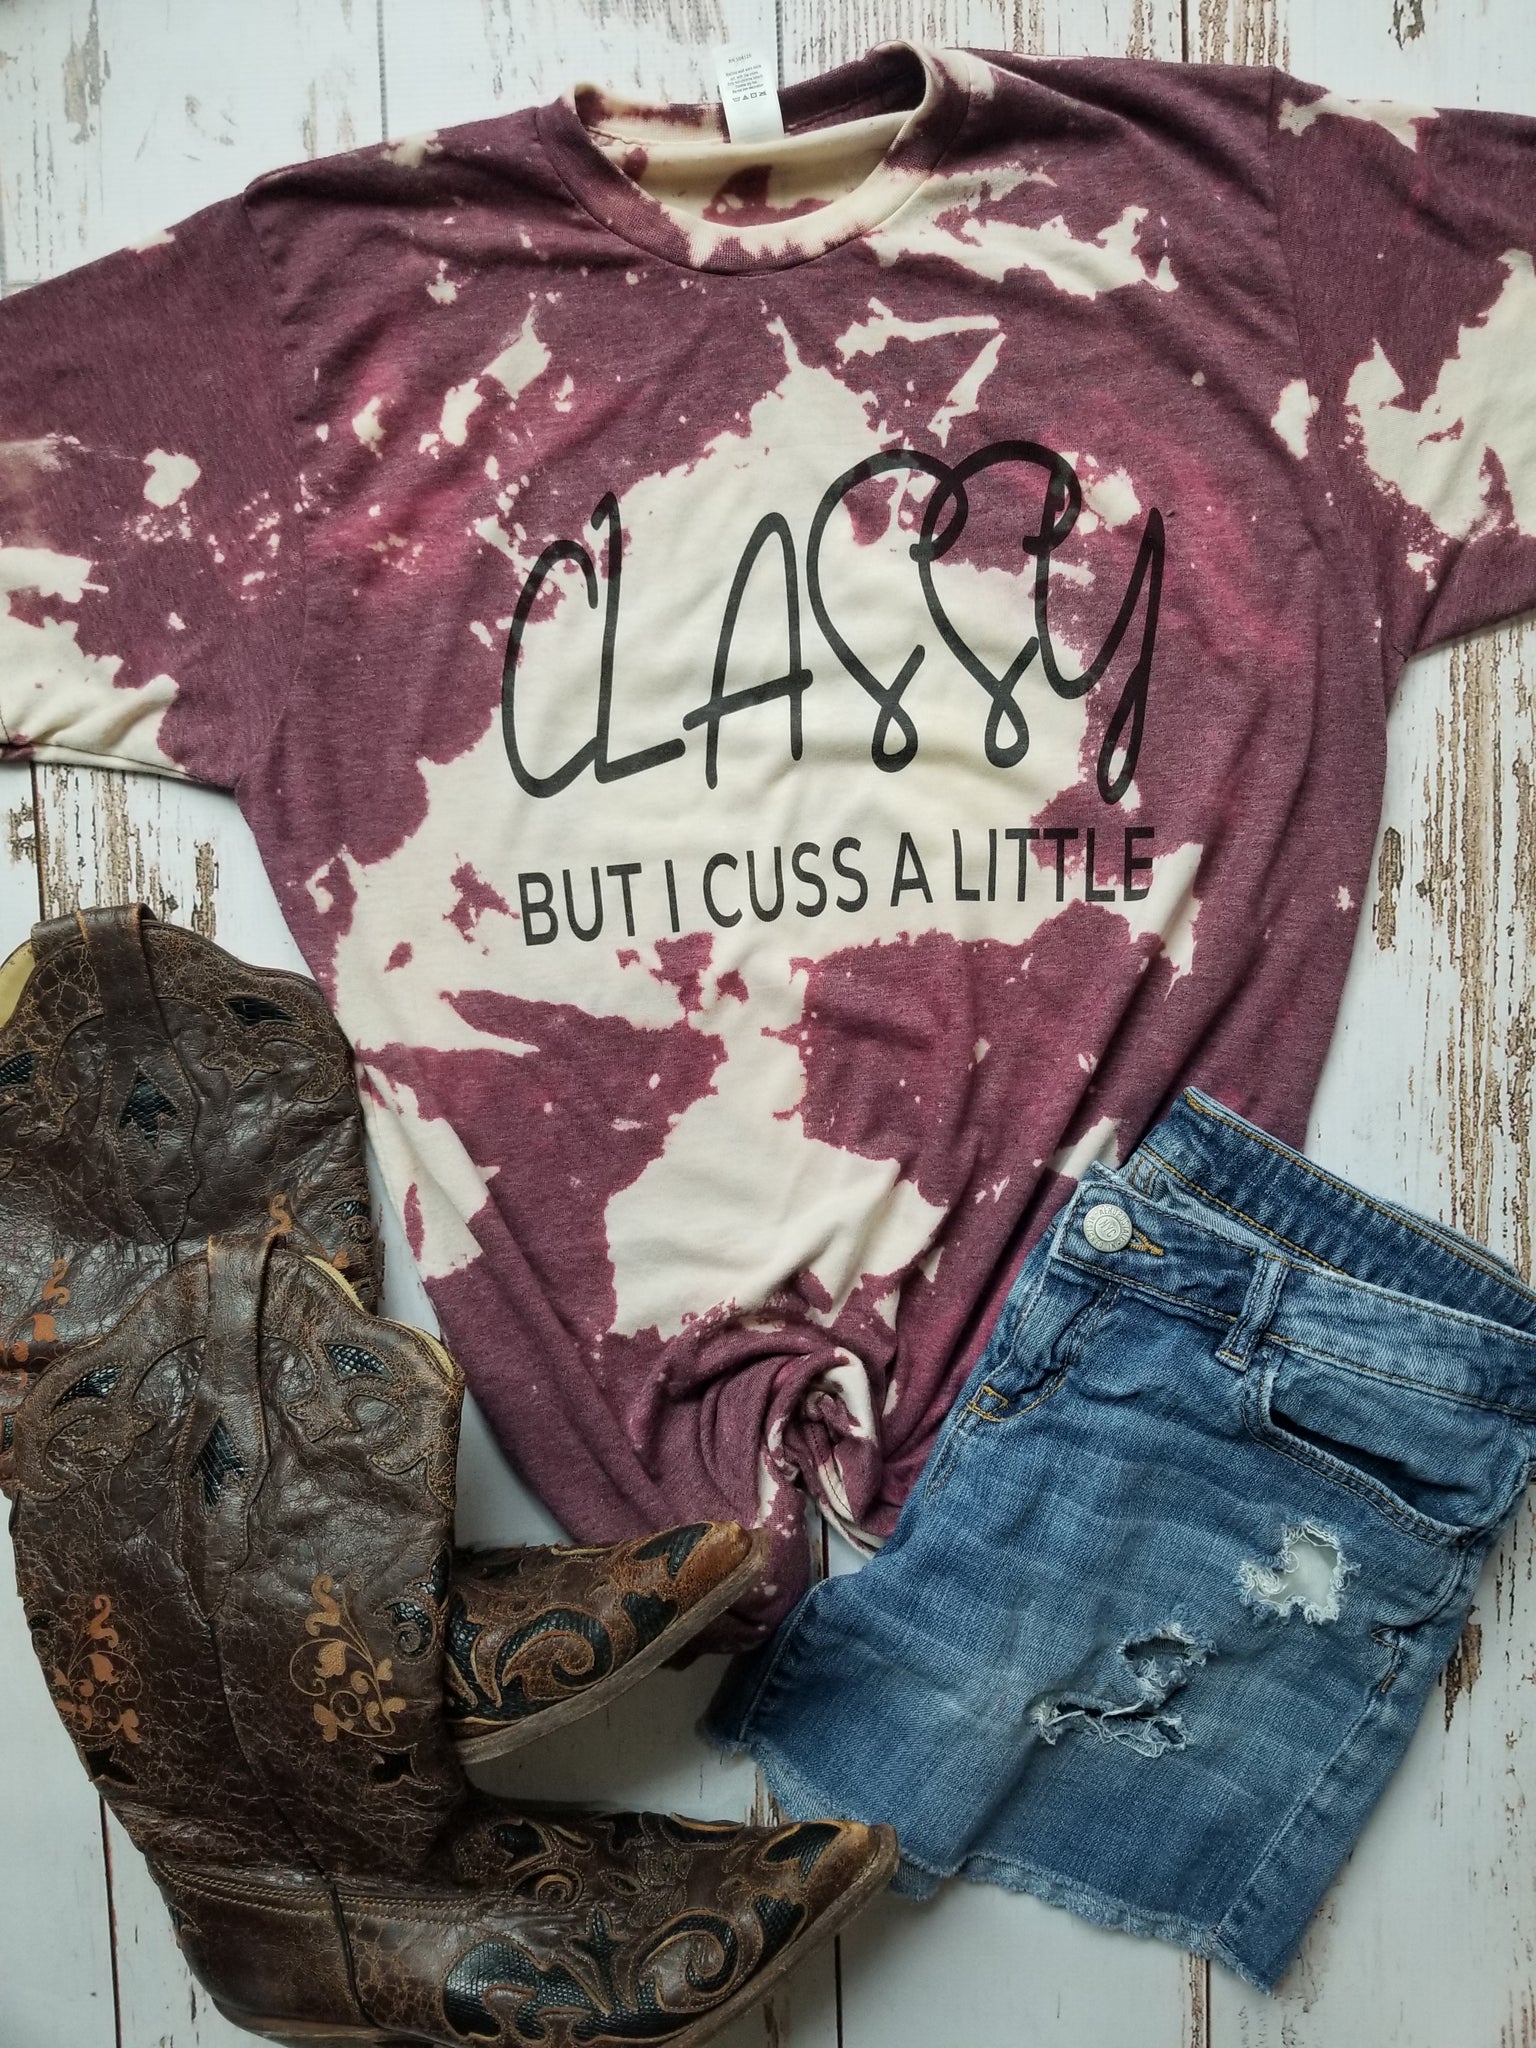 Classy but I cuss a little burgundy acid washed tee